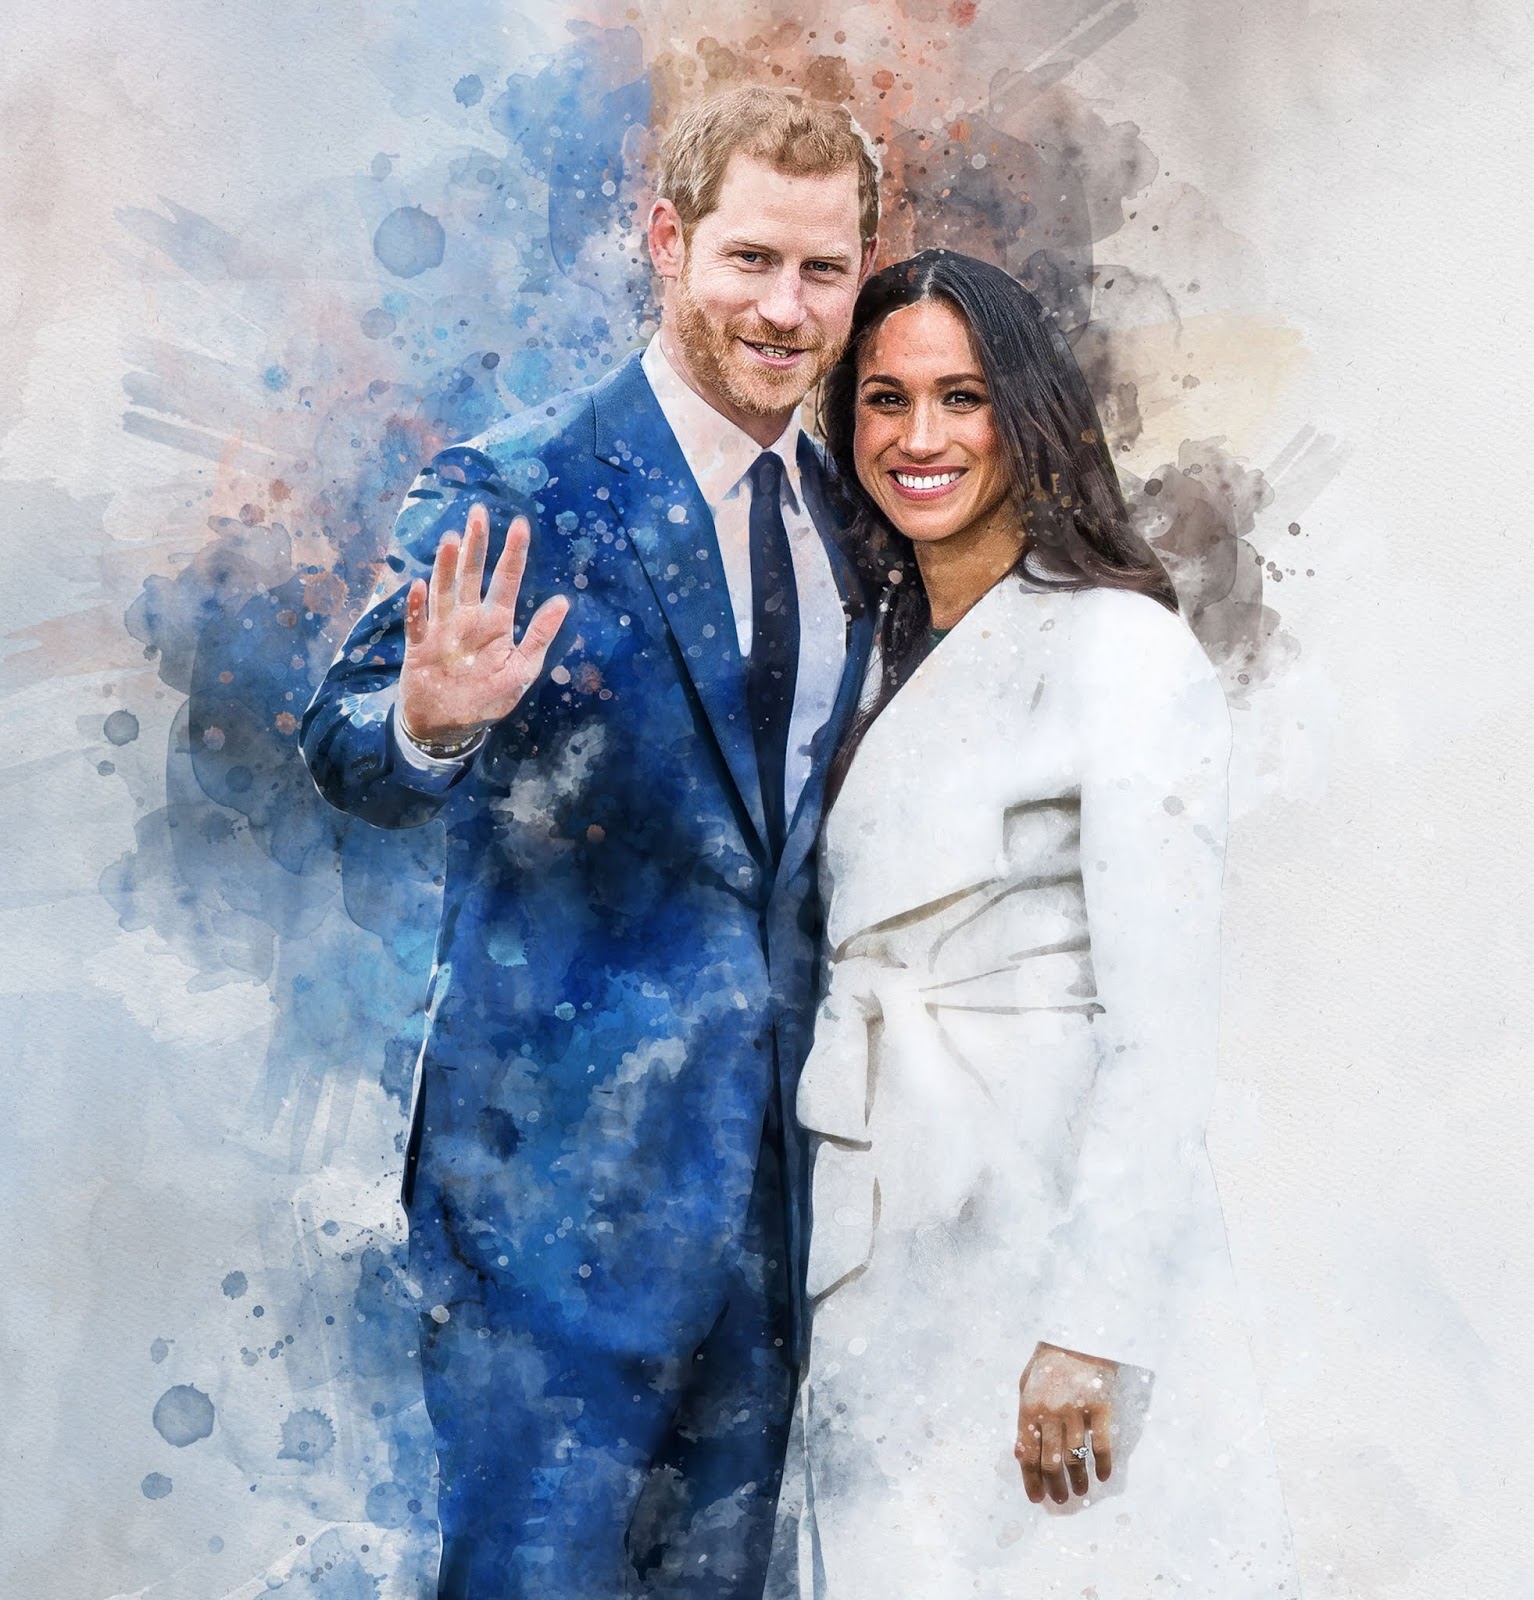 Swimsuits featuring Prince Harry and Meghan Markle's faces, posted on Friday, 18 May 2018